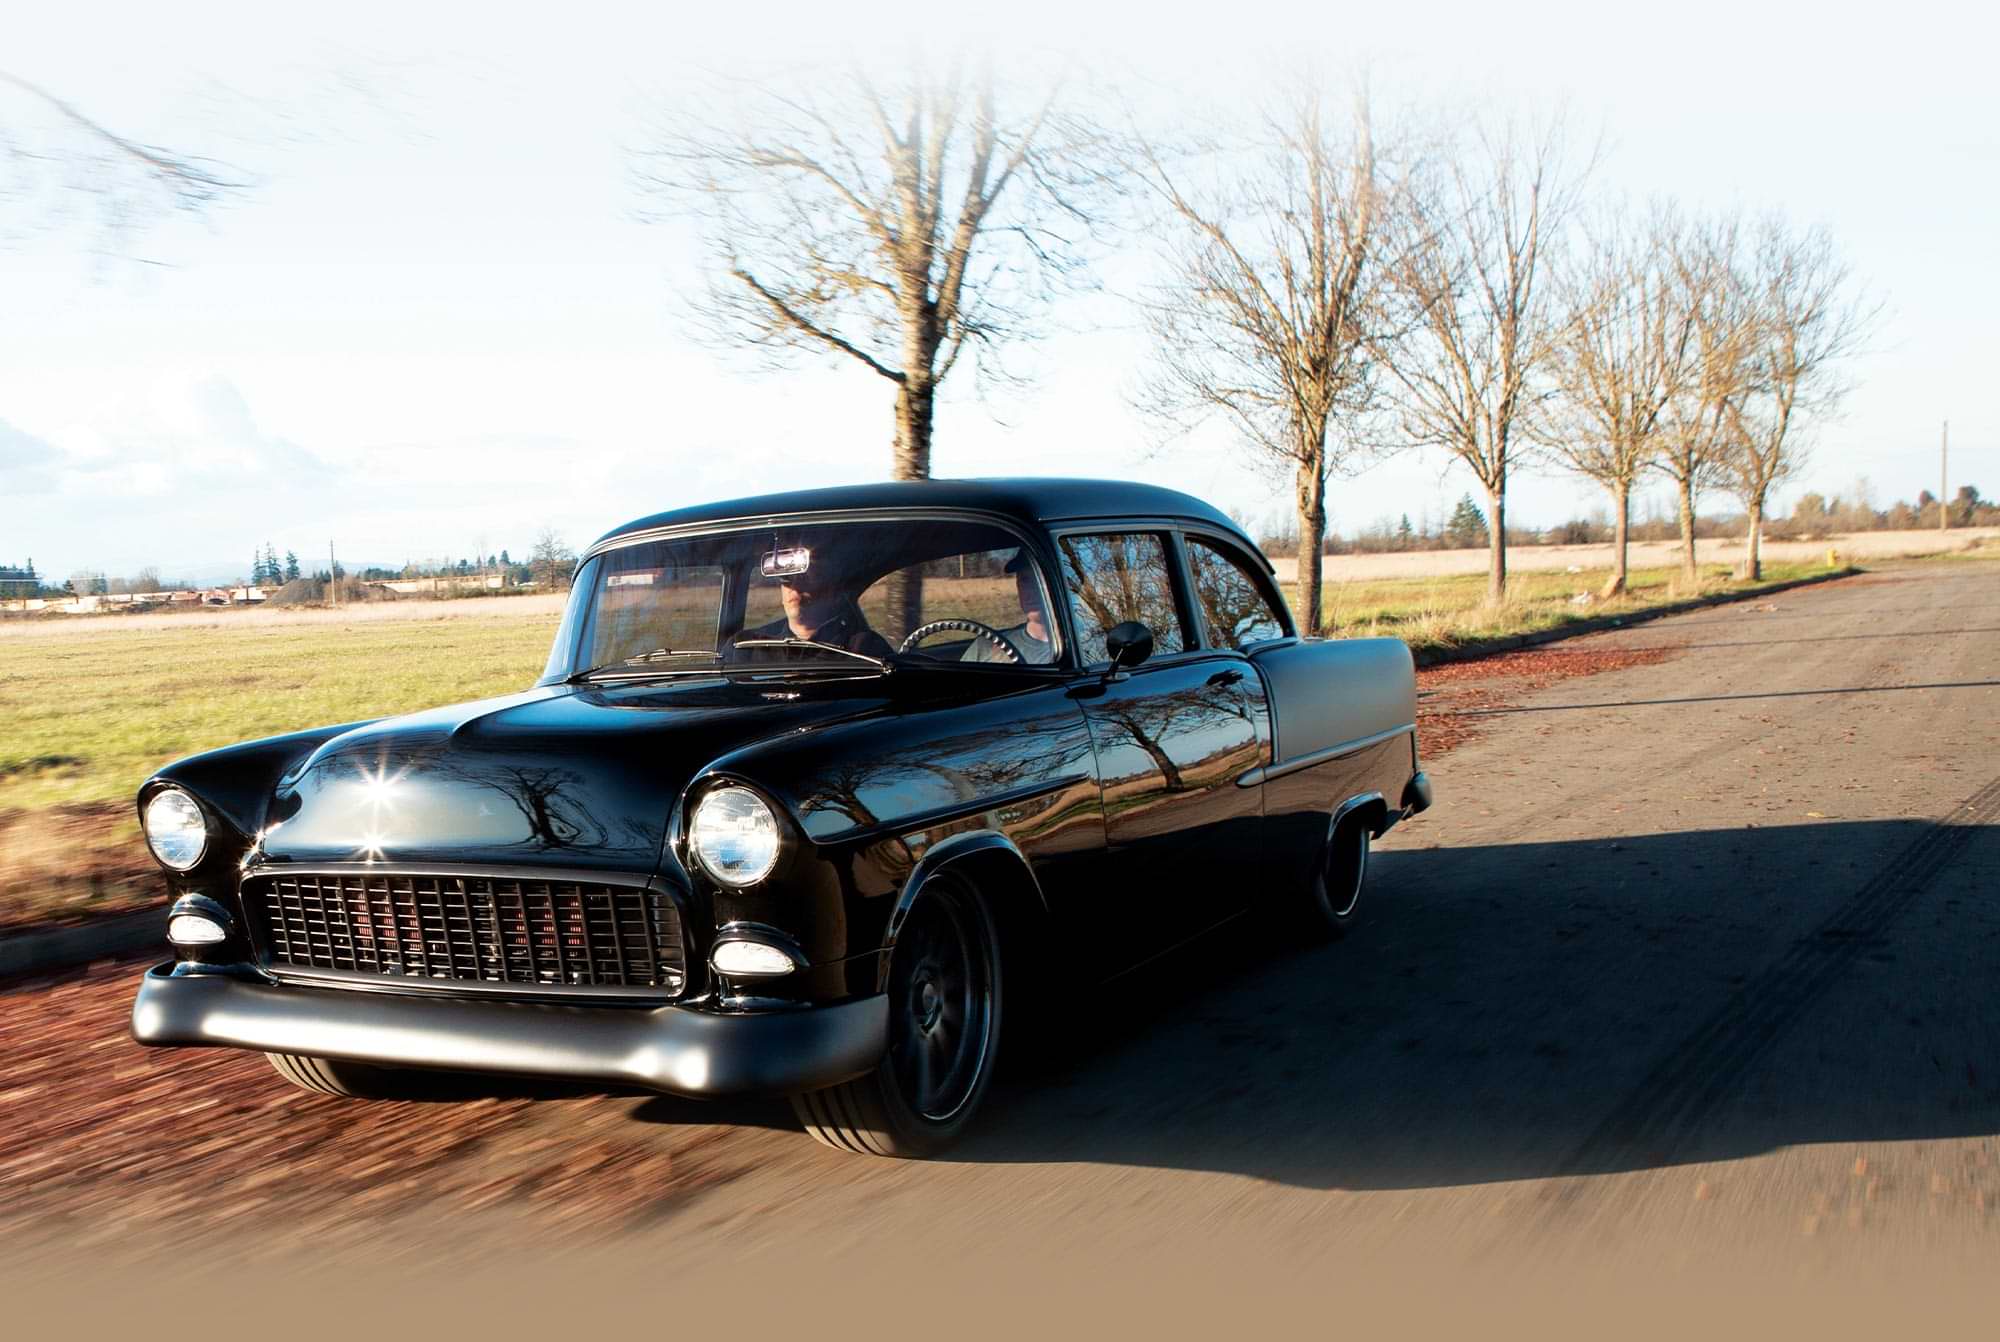 three quarter driver's side view of a black ’55 Chevy riding down a tree lined road